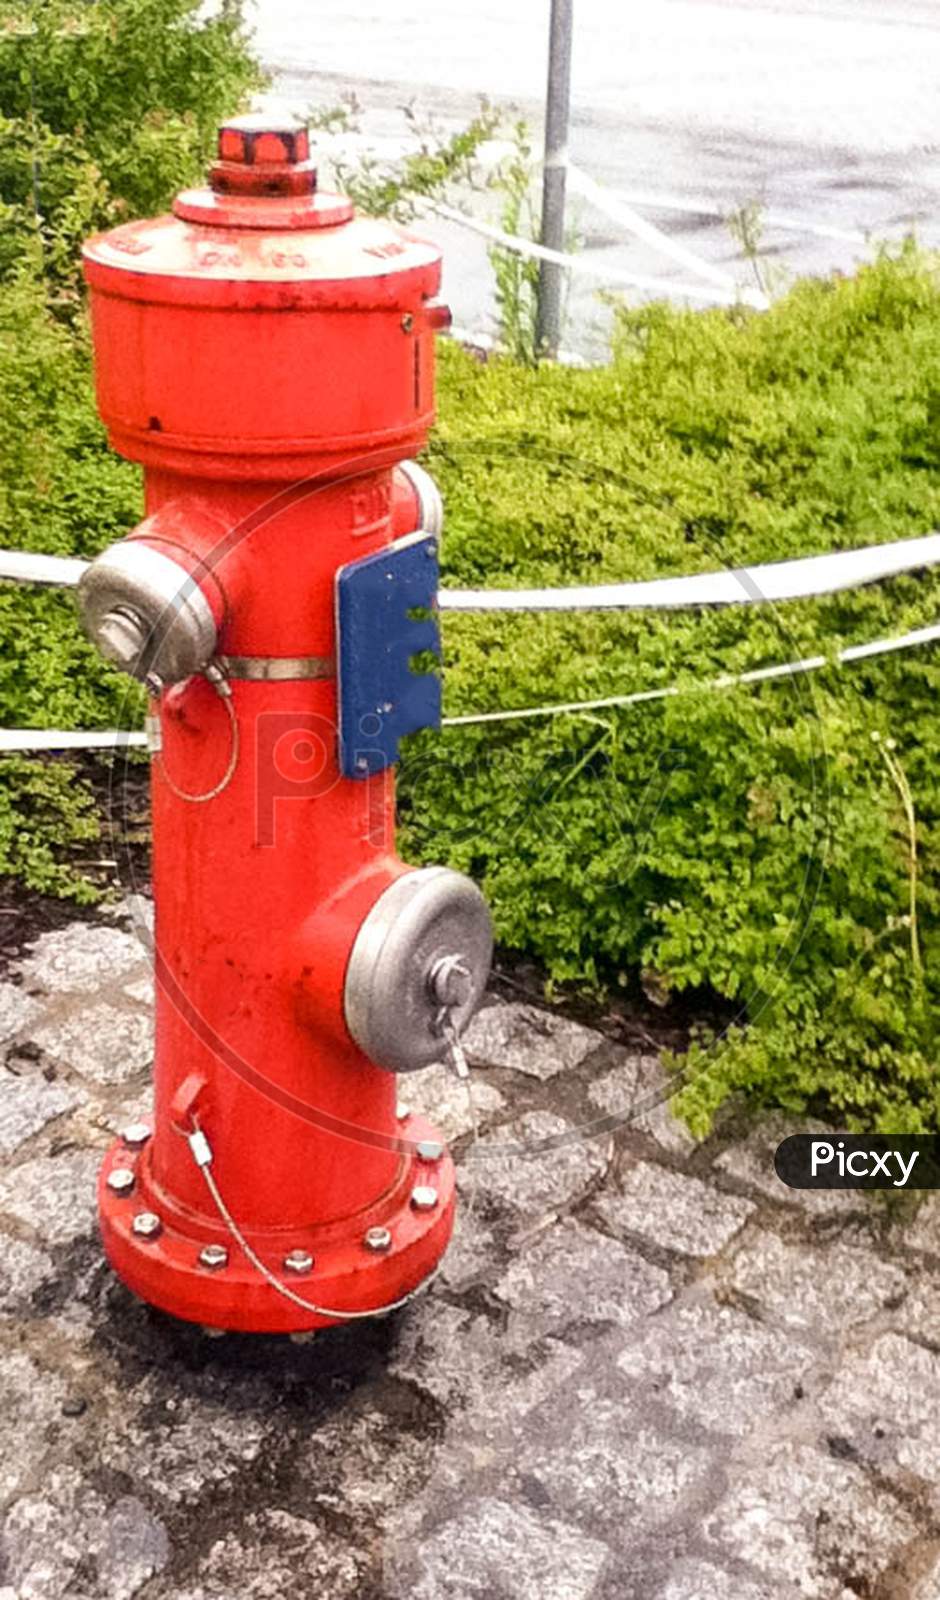 Red American Fire Hydrant